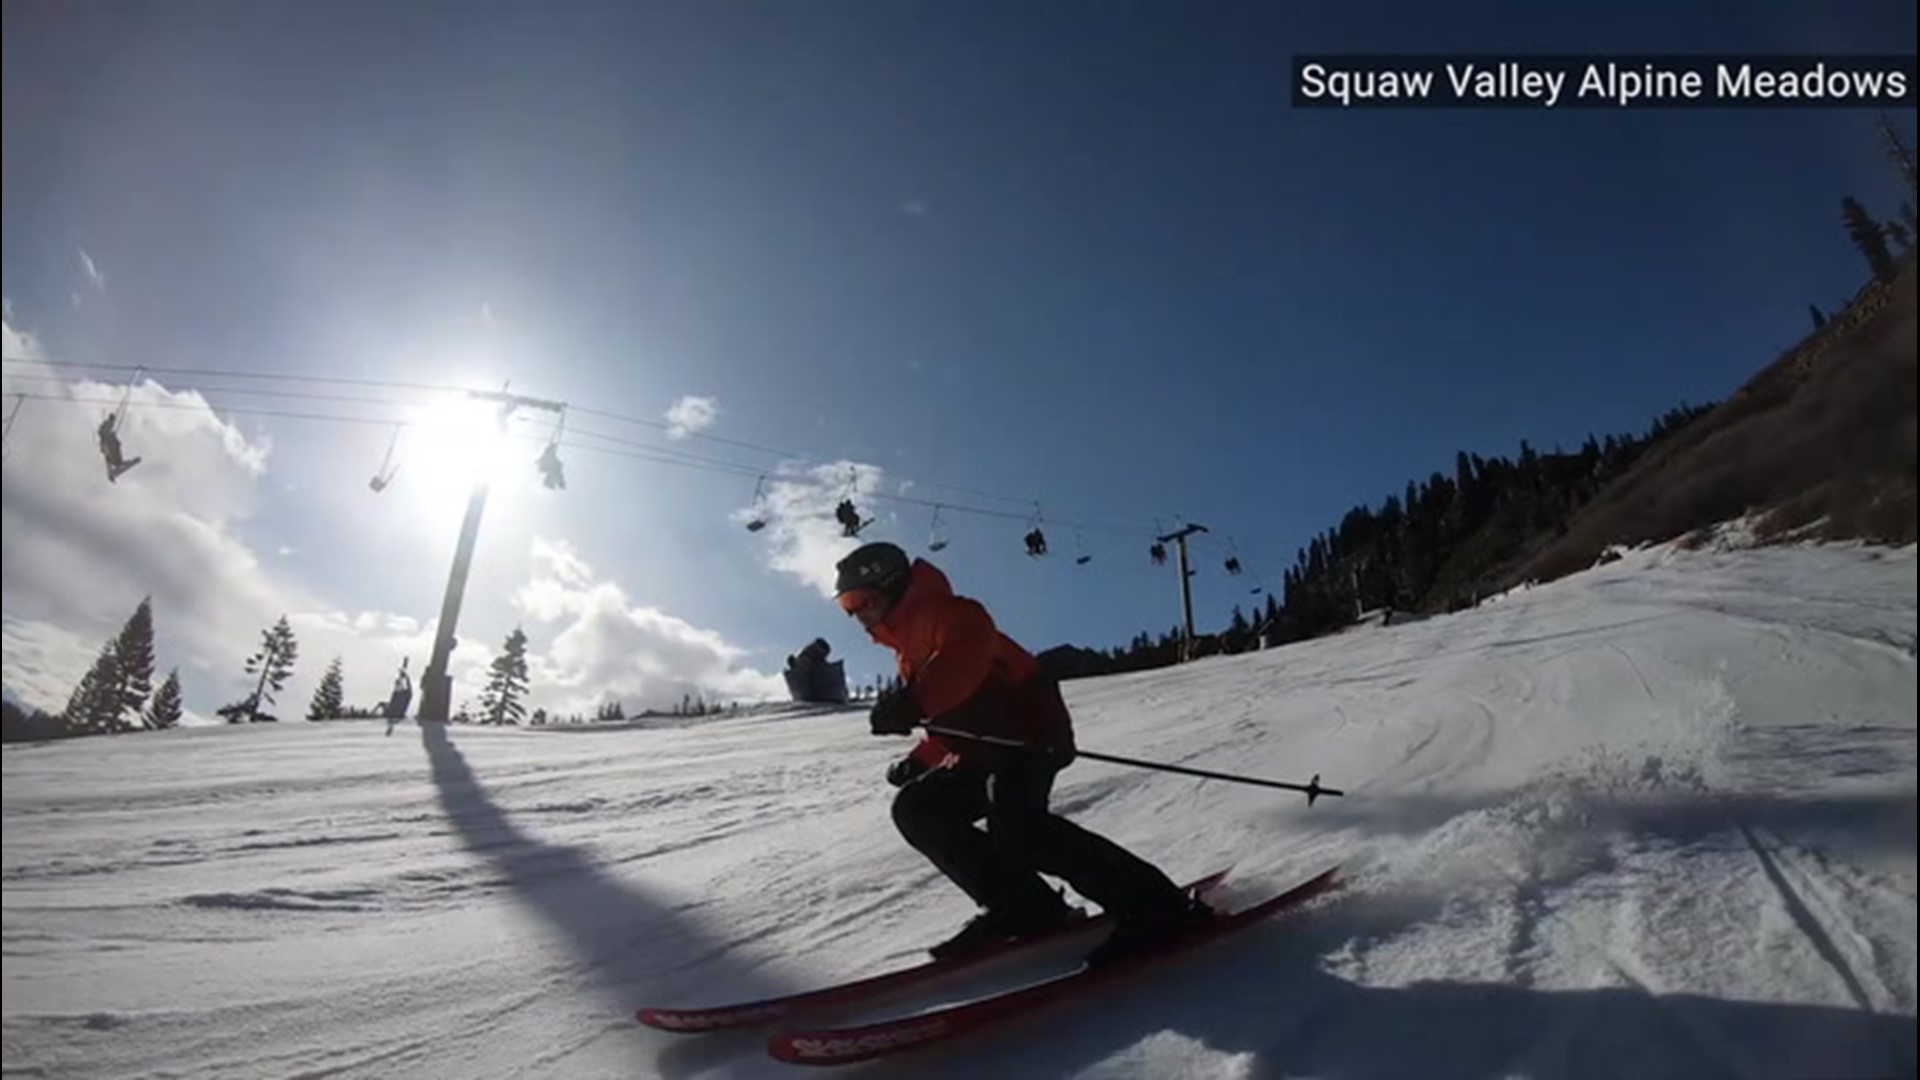 Excited skiers and snowboarders in Olympic Valley, California, began lining up two hours before first chair on Nov. 15. This is the second earliest that Squaw Valley Alpine Meadows has opened in the last 10 years.